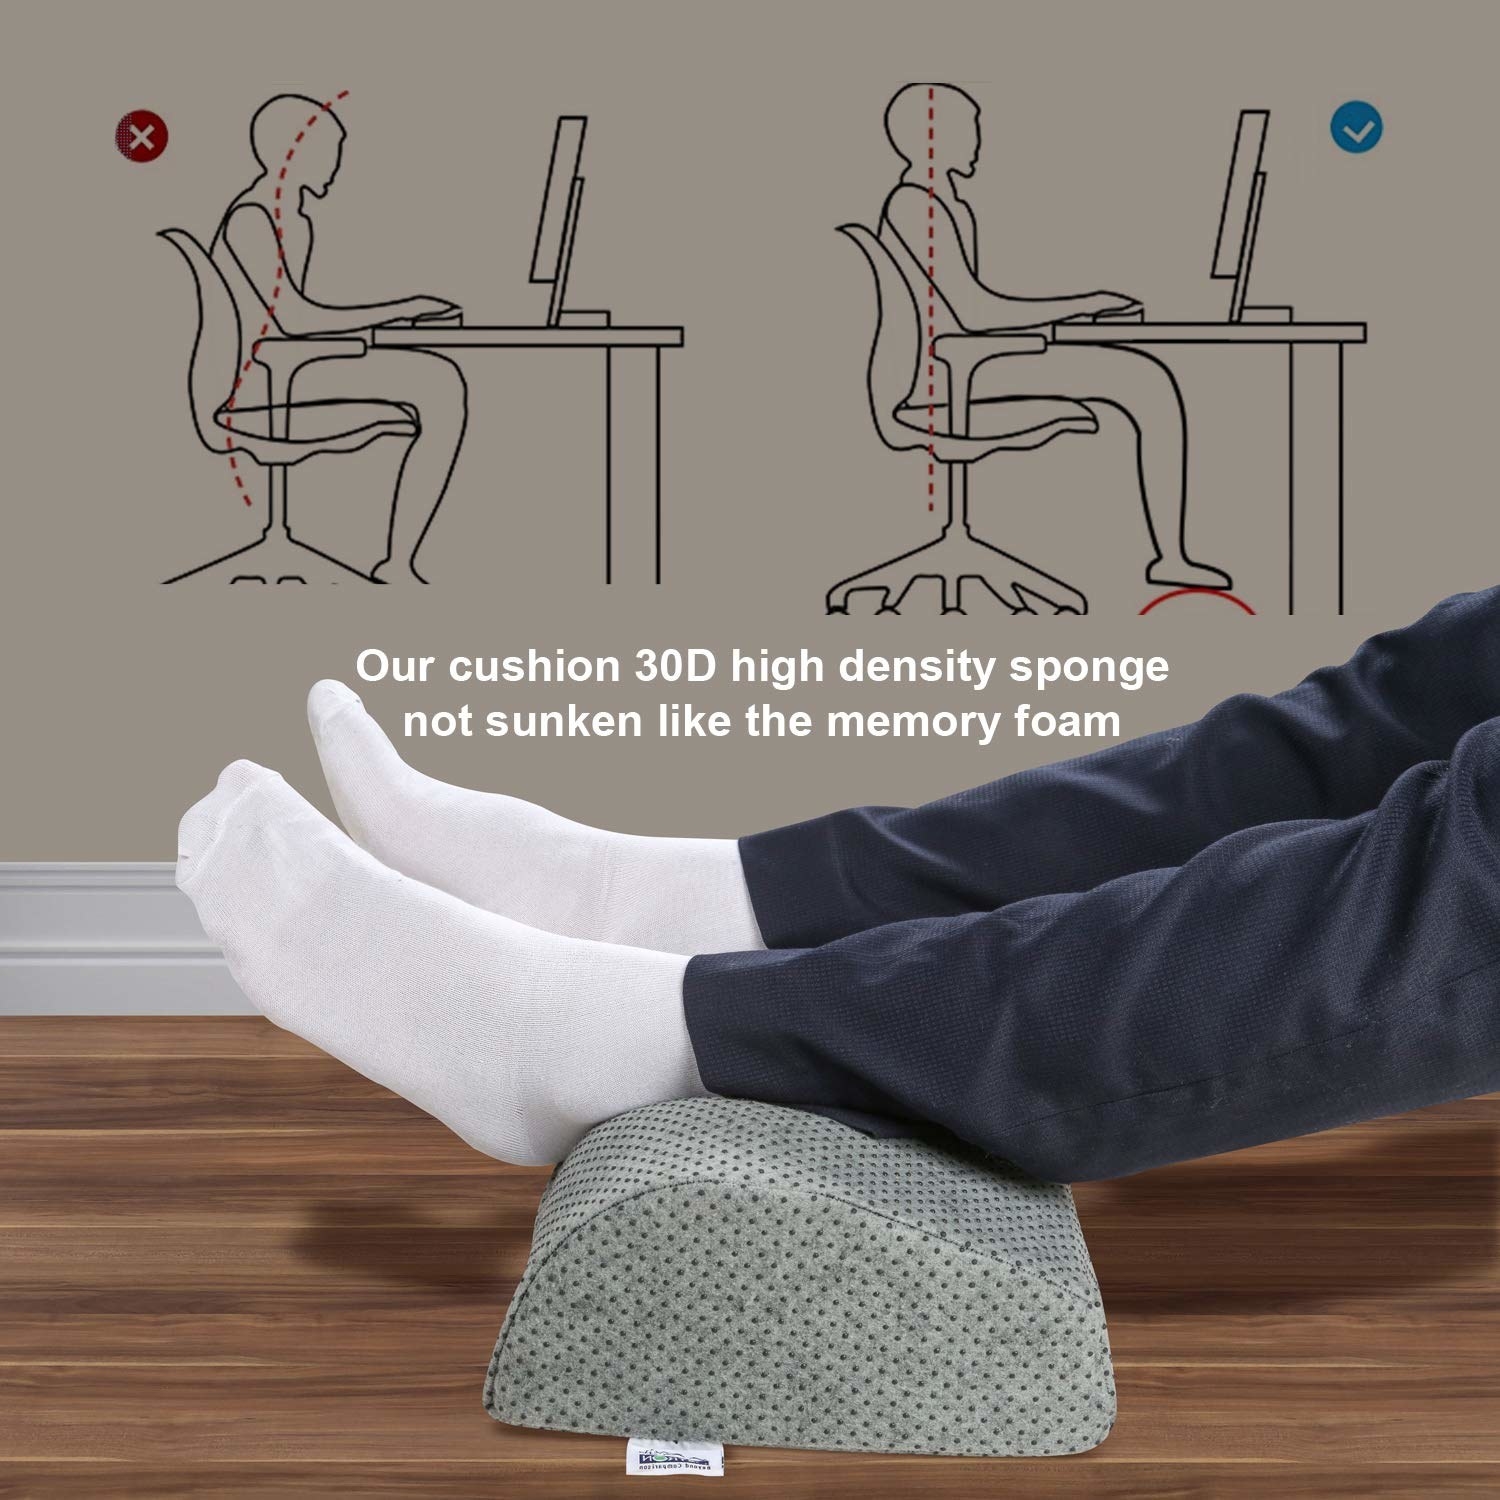 A close up of a person&#x27;s legs resting on a foot pillow, alongside an illustration showing how the pillow improves posture